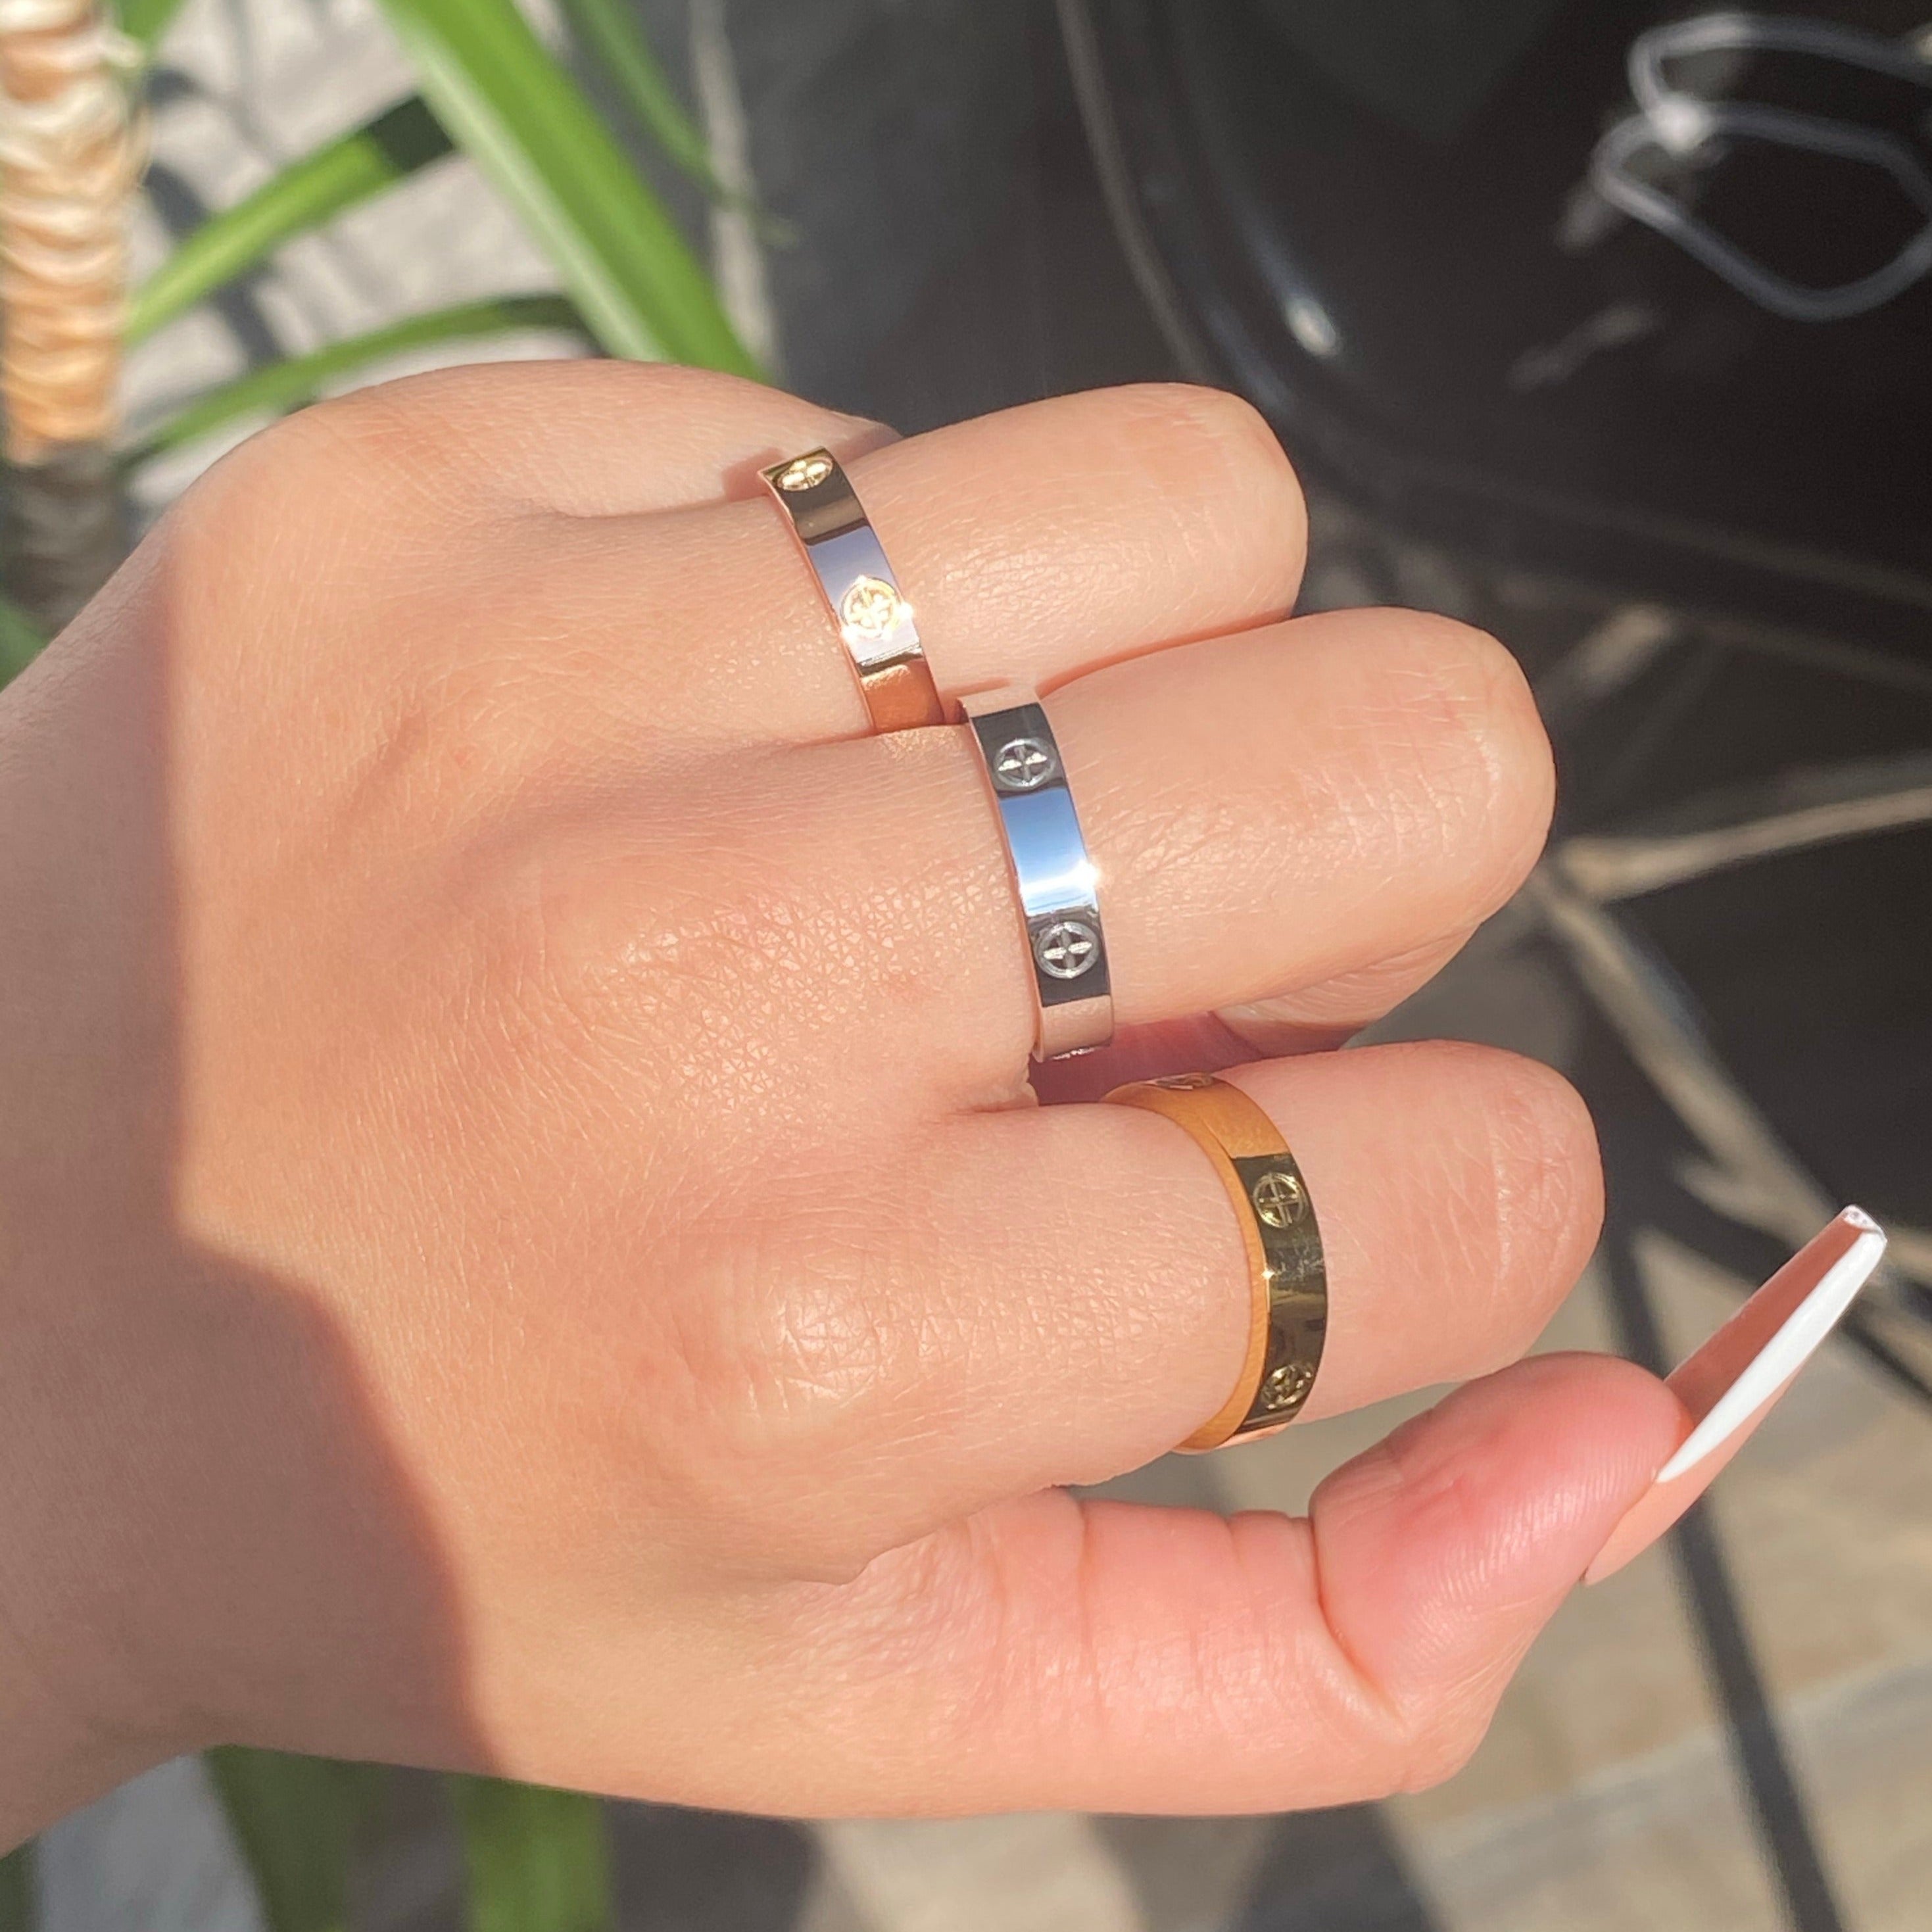 CARTIER LOVE RING CARTIER LOVE BAND COUPLES BAND #cartier #love #ring  #wedding #band #diamonds #cartierloveringwedding… | Cartier love ring,  Wedding rings, Jewelery